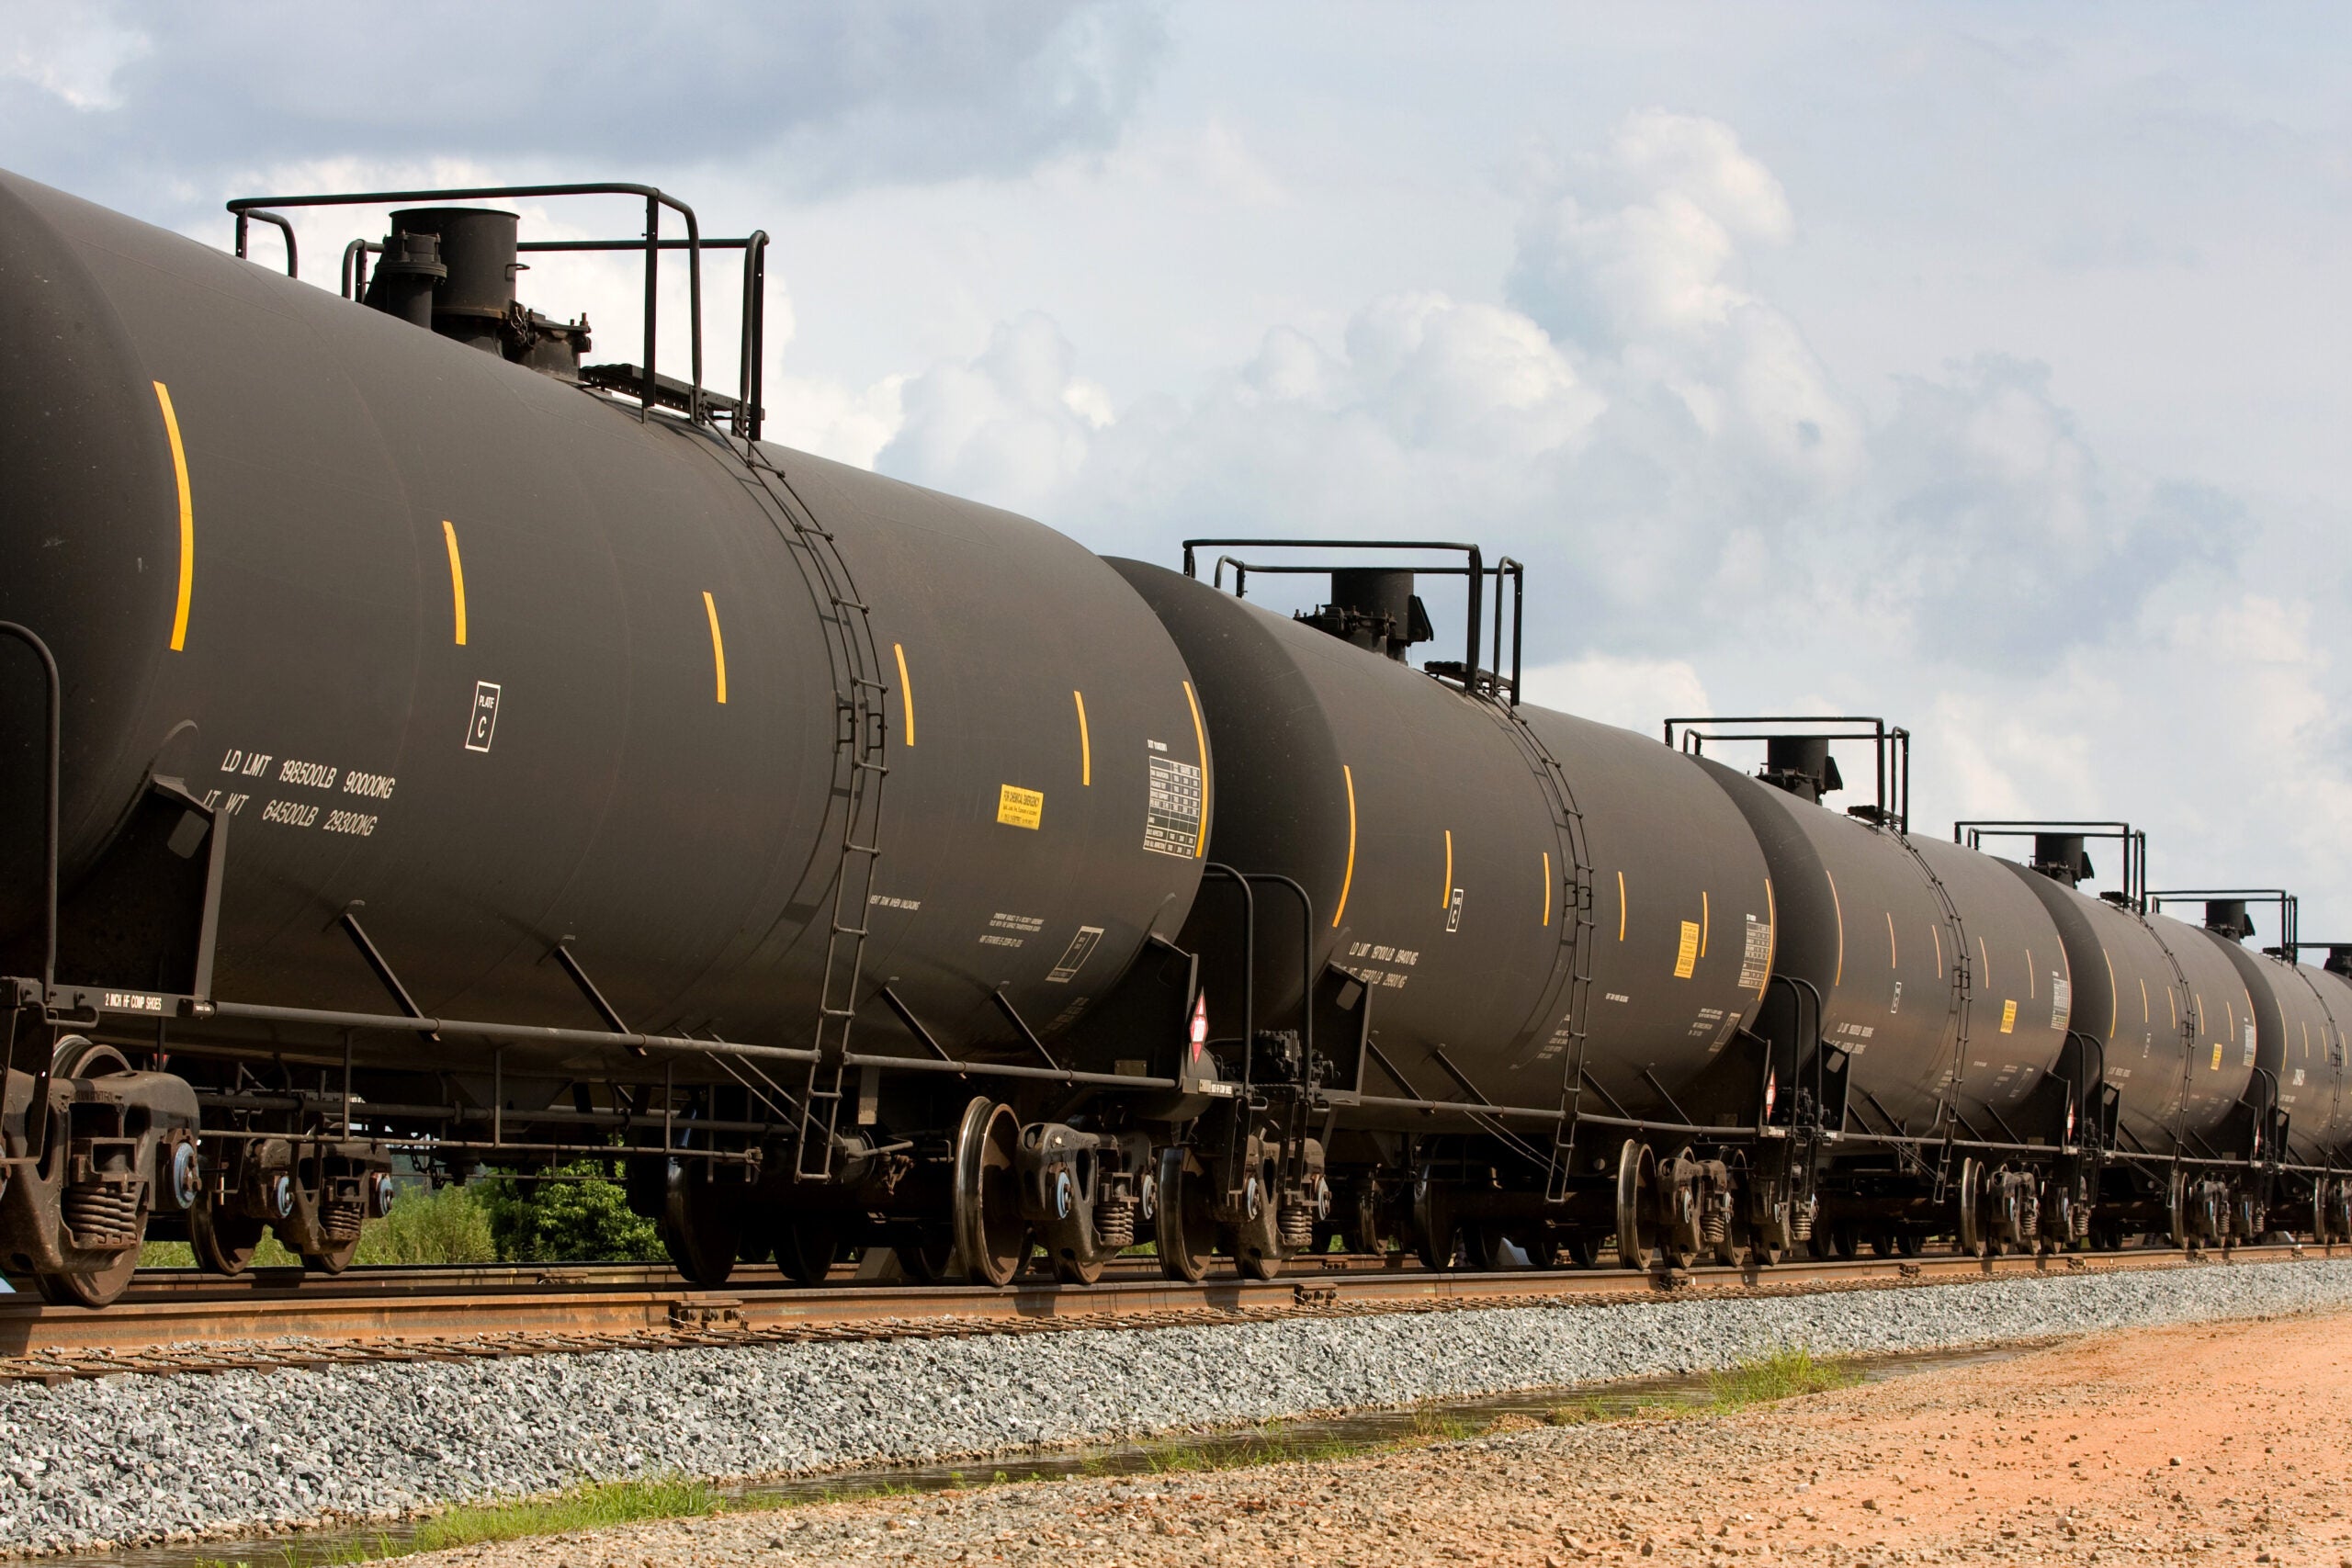 Railroad train of tanker cars transporting crude oil on the tracks.